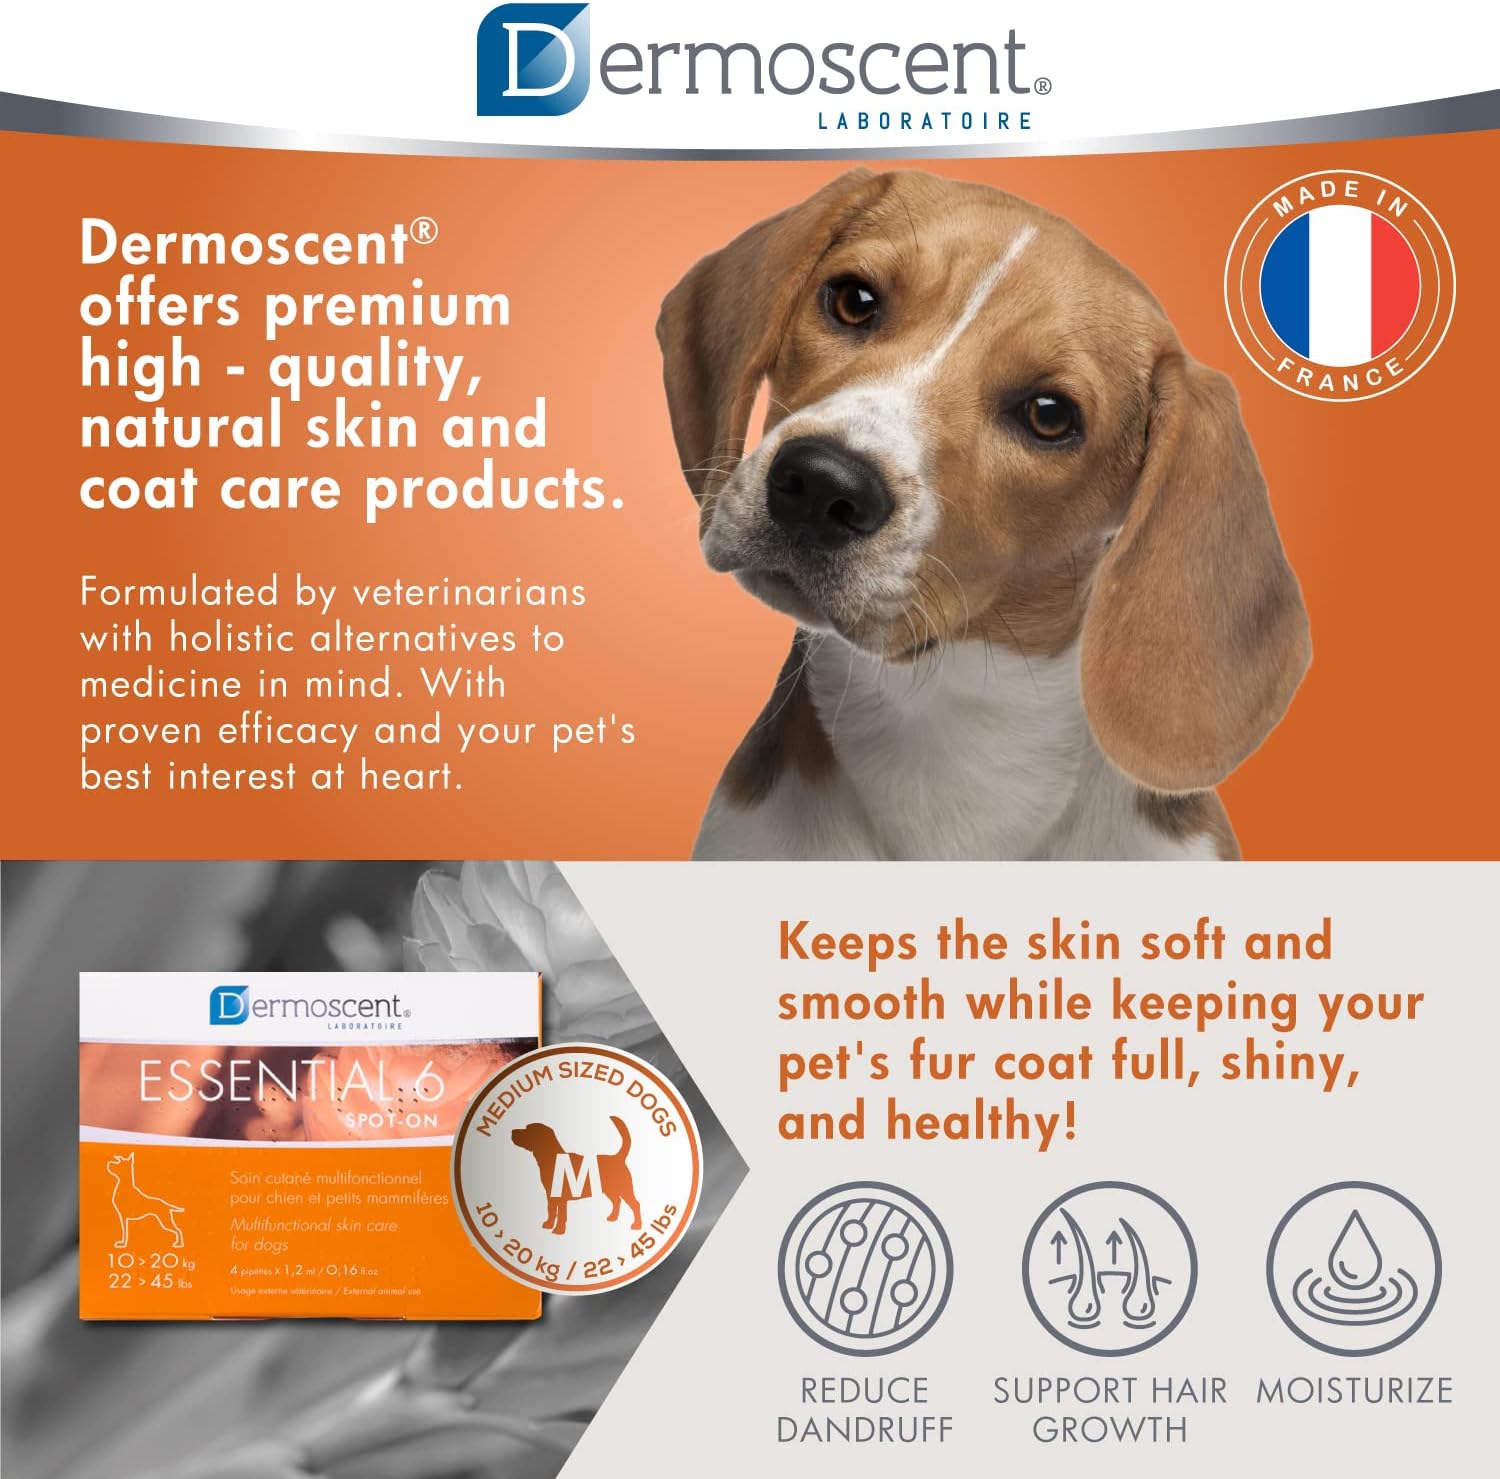 Dermoscent Essential 6 spot-on - Dog Skin Care for Dandruff & Allergy Relief with Vitamin E Oil - Anti Itch for Dogs - Natural Ingredients for Sensitive Skin - Dogs 10-20 kg - 4 Pipettes of 1.2 ml : Pet Itch Remedies : Pet Supplies